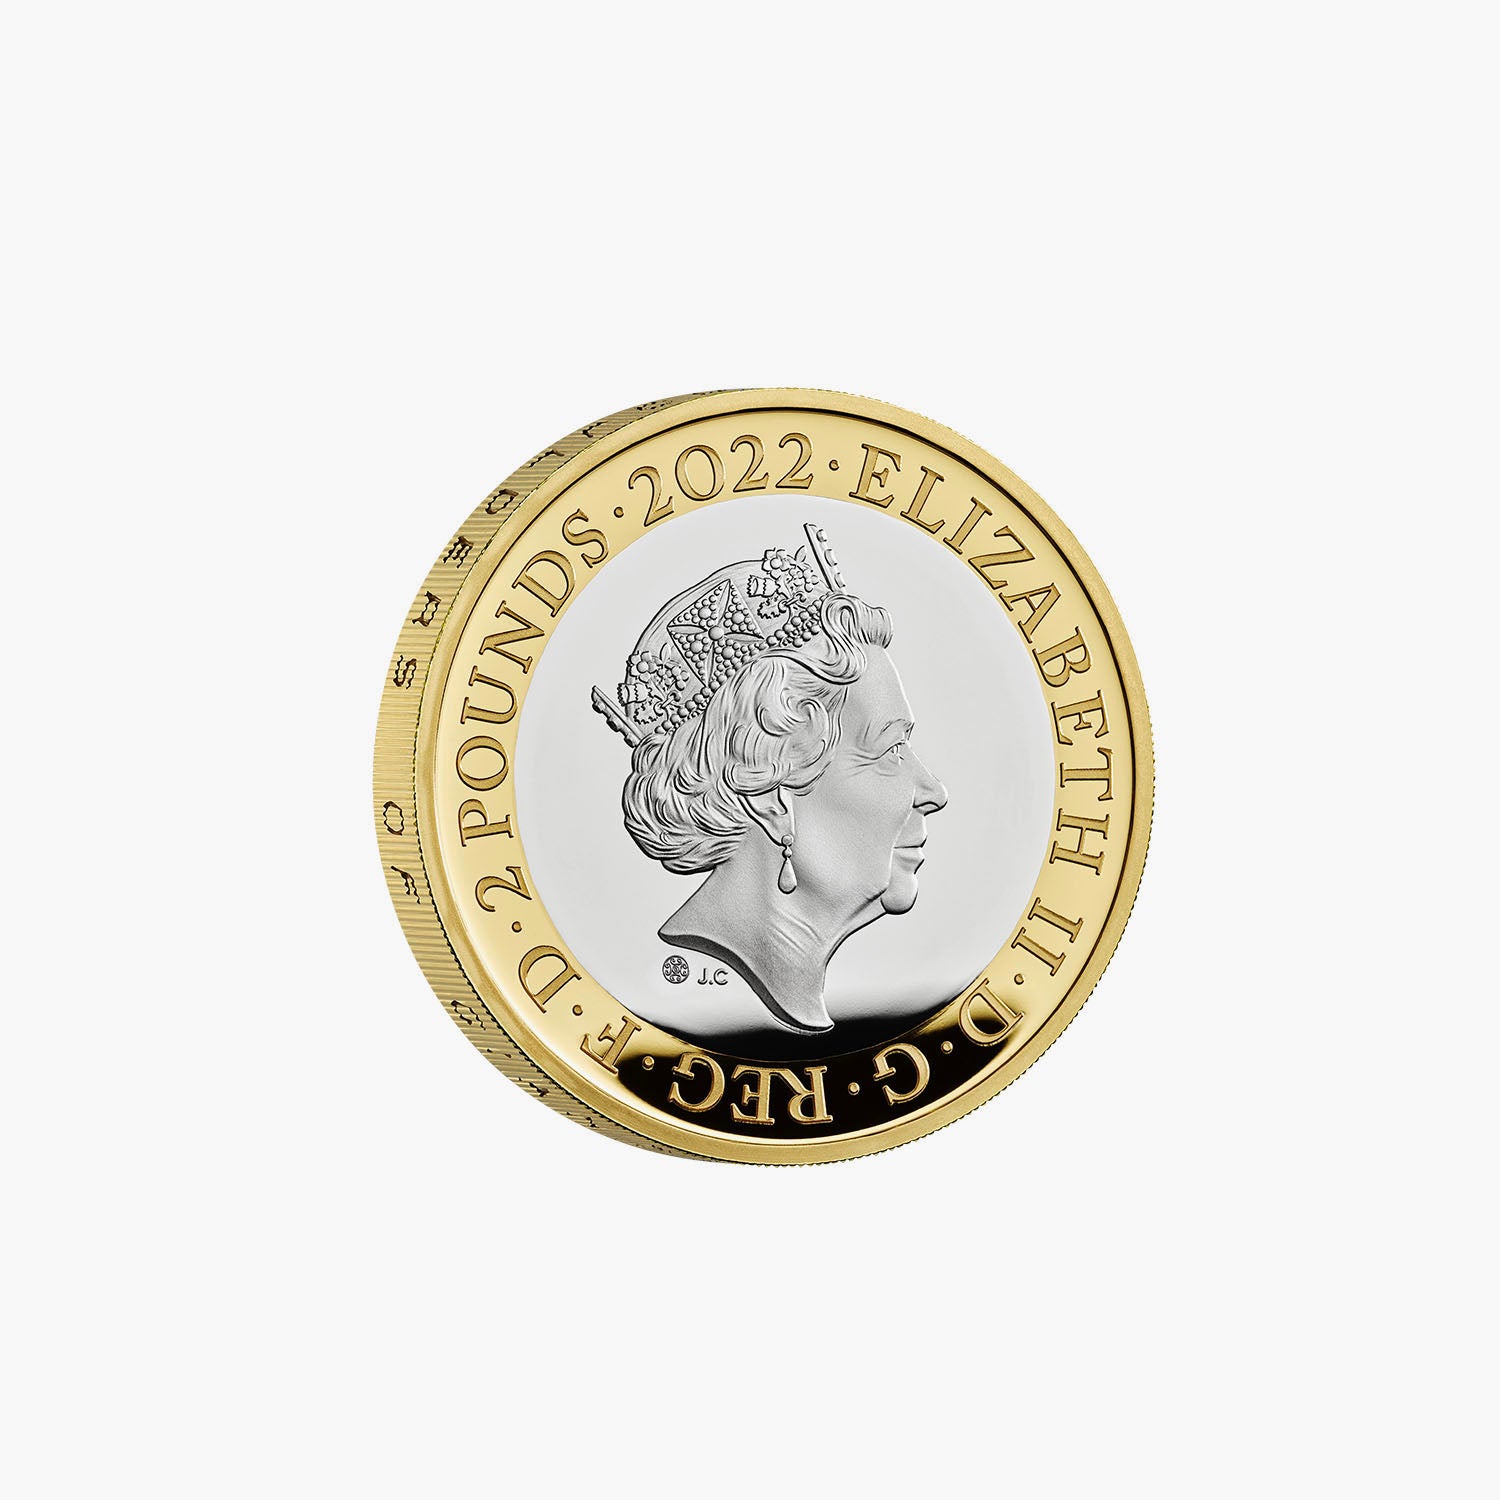 Celebrating 25 Years of the £2 2022 UK £2 Silver Proof Coin